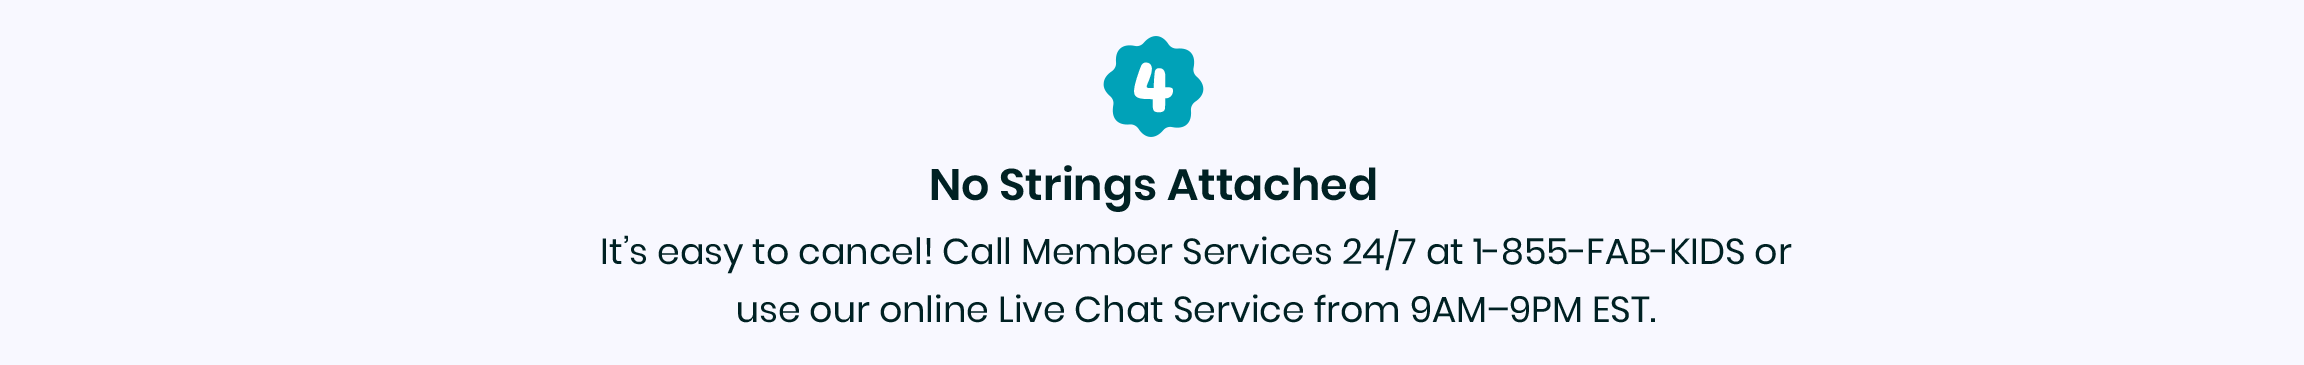 4. No strings attached - It's easy to cancel! Call Member Services 24/7 at 1-855-322-5437 or use our online Live Chat Service from 9AM-9PM EST.